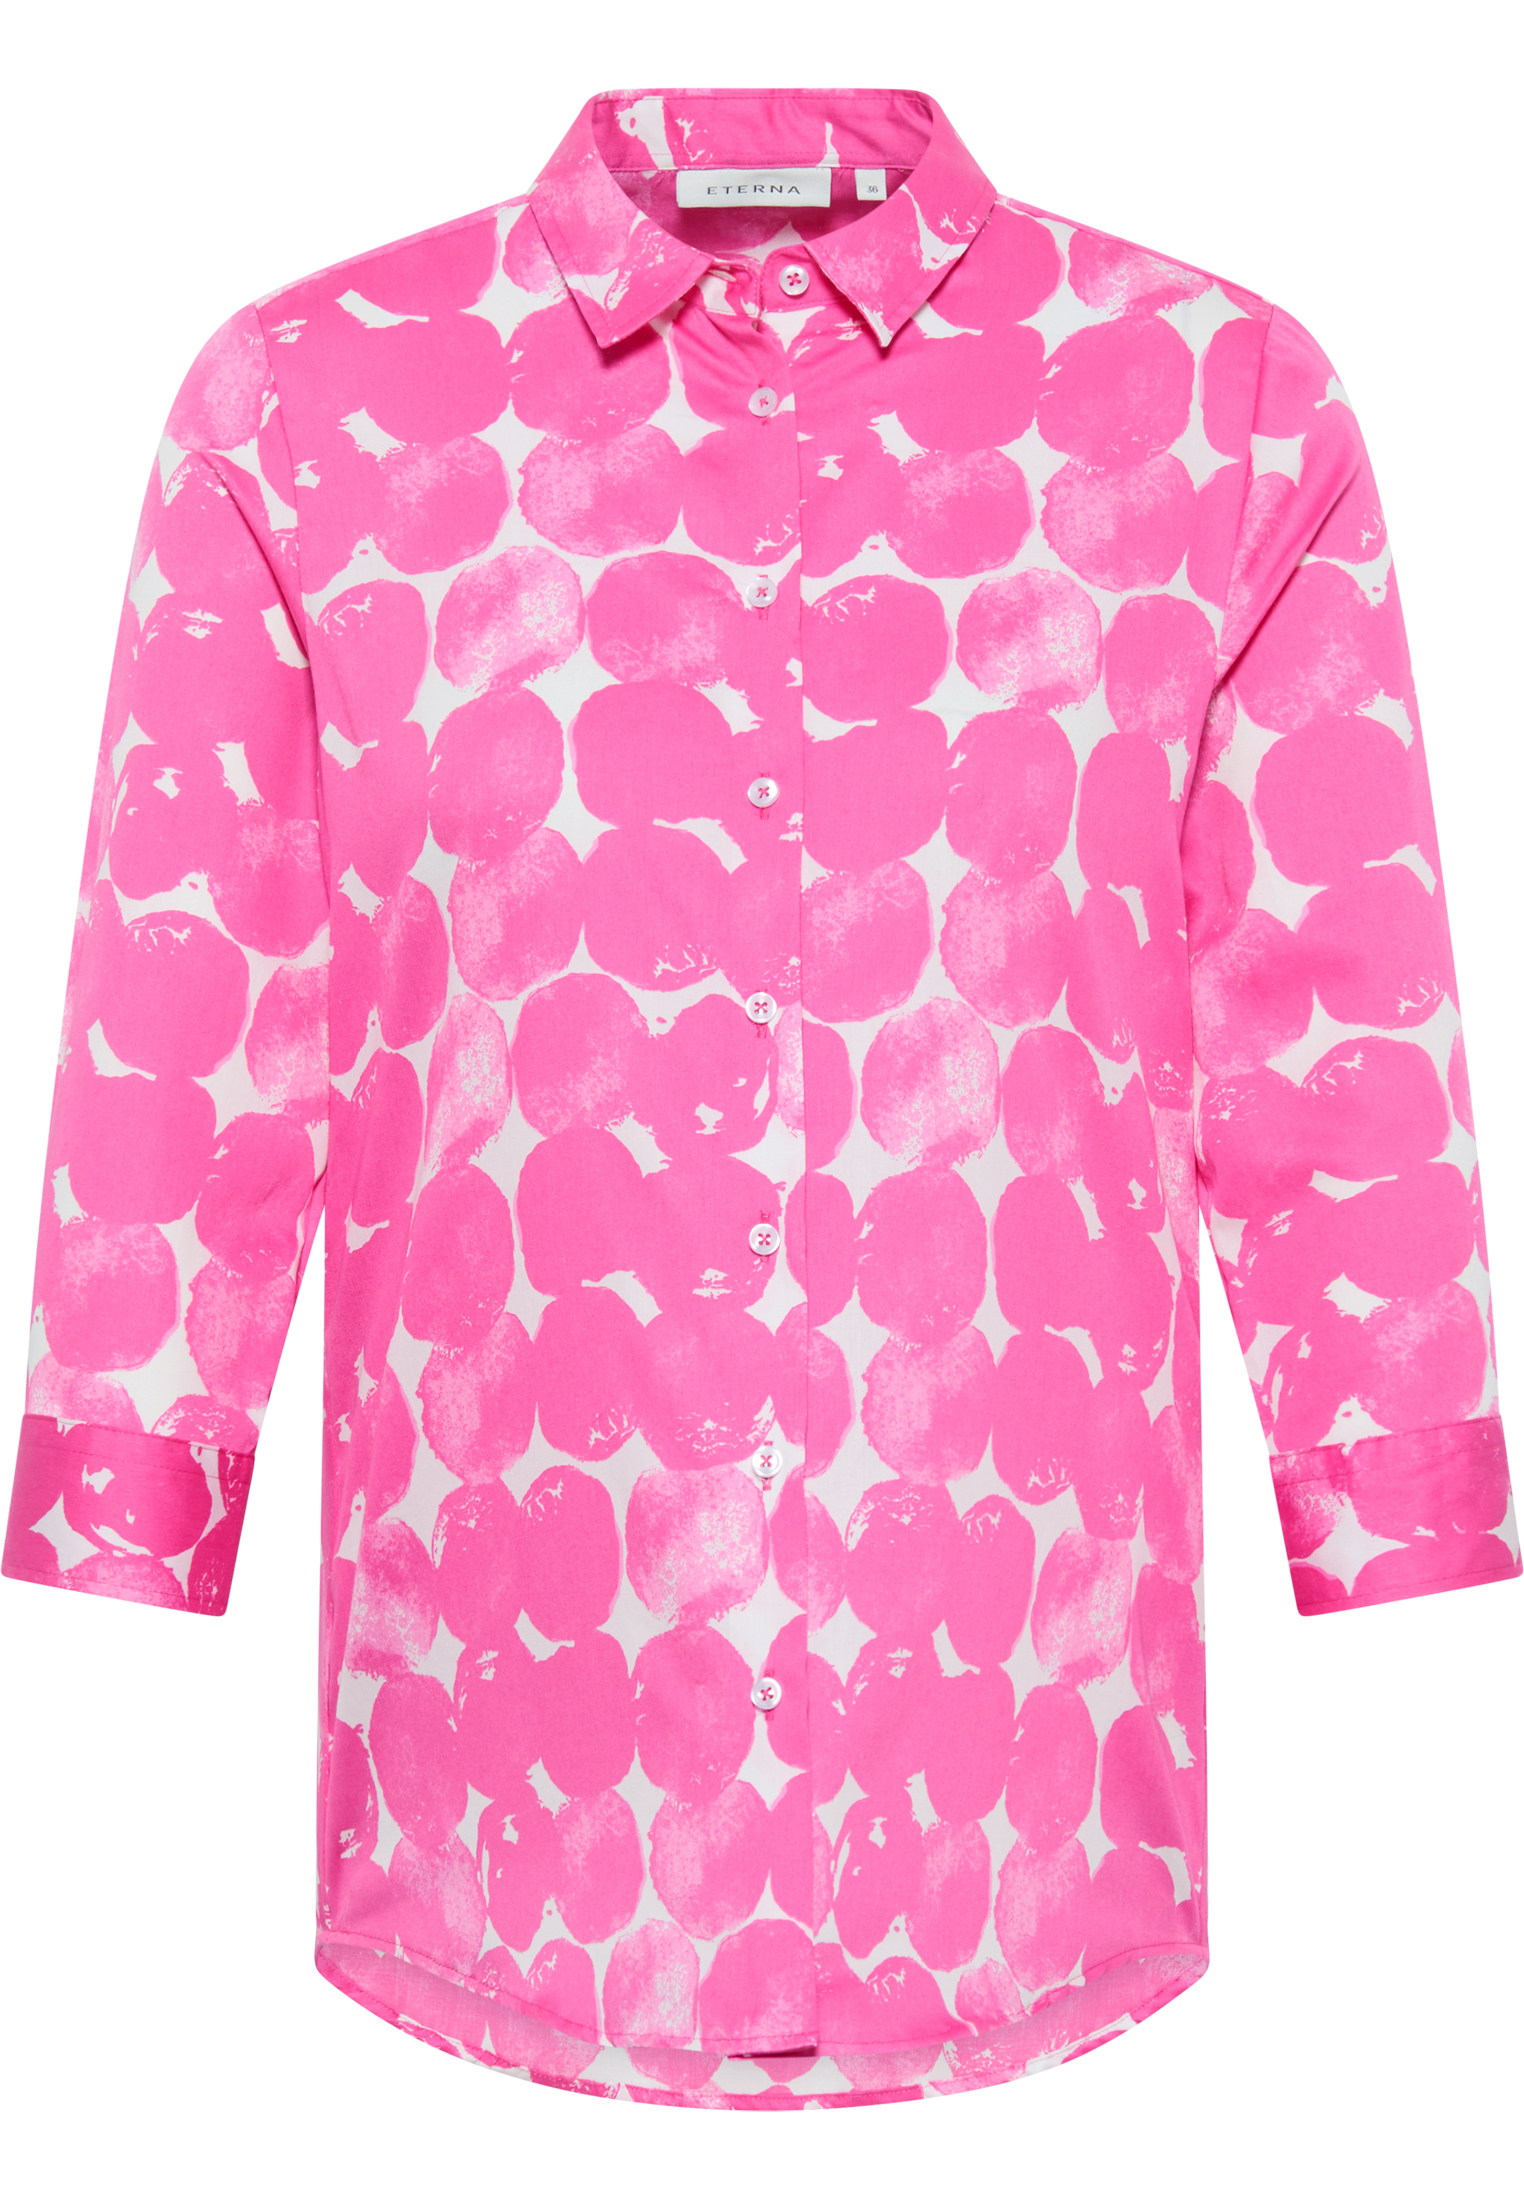 shirt-blouse in 2BL03949-15-21-50-3/4 50 3/4 | pink | pink printed | | sleeves